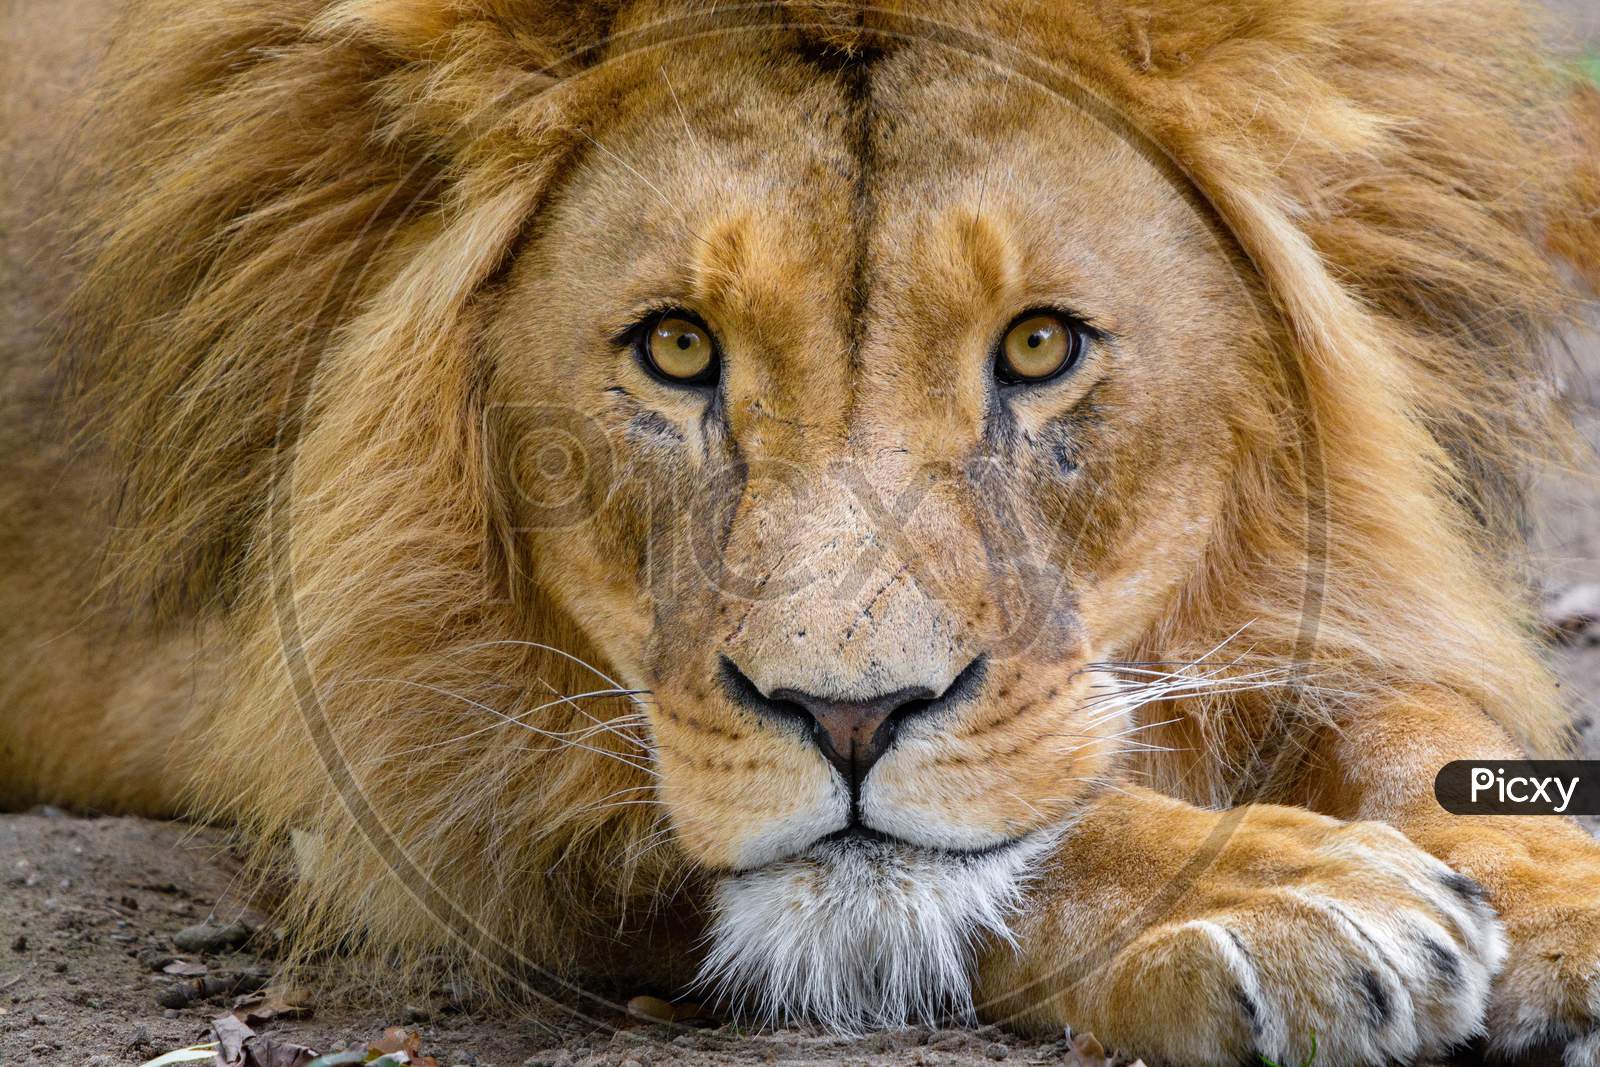 Portrait Of A Brown Lion. The Lion Is Looking At The Camera